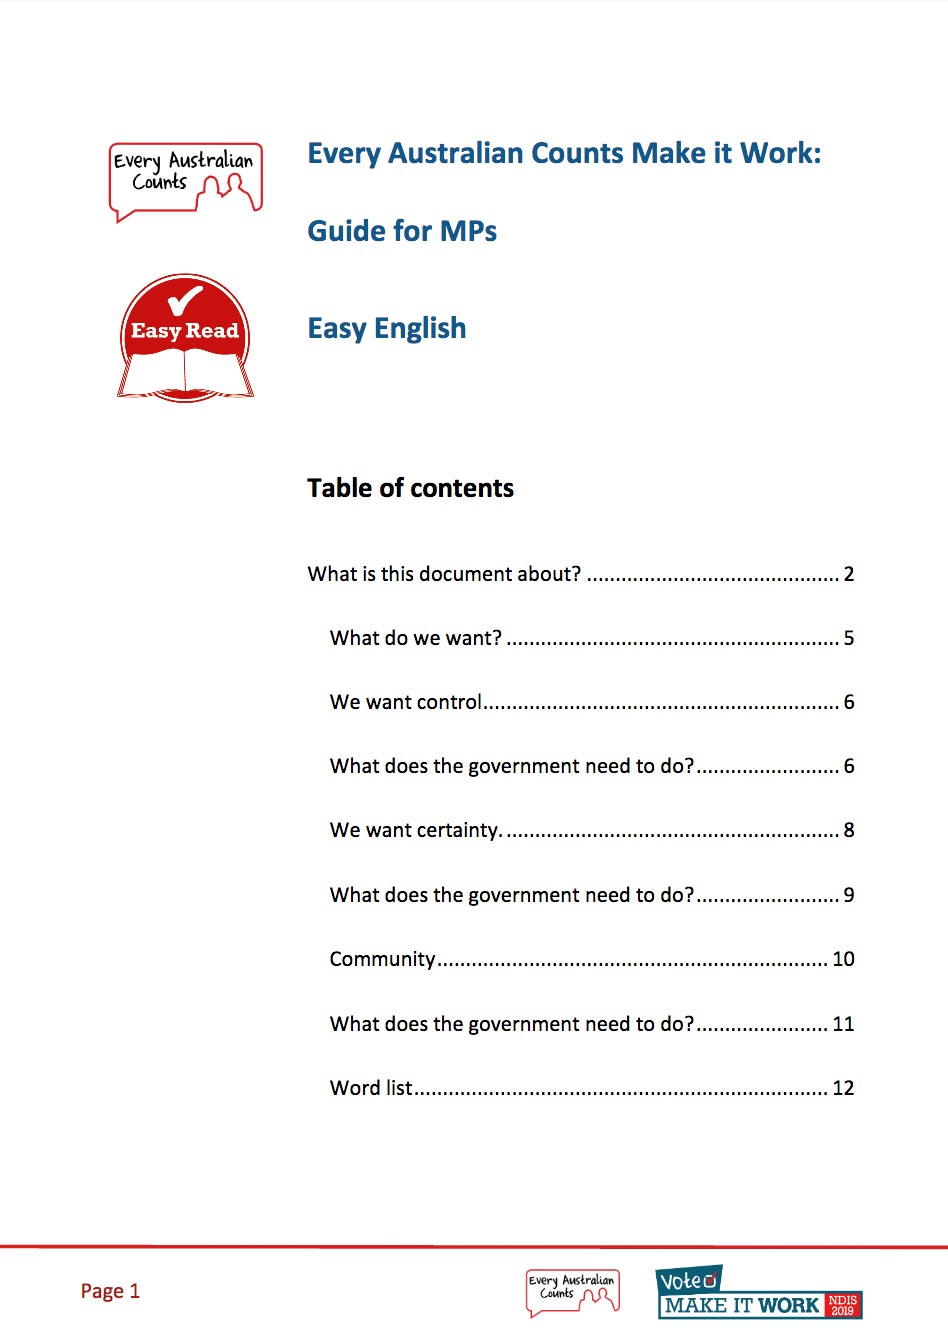 Easy English guide cover